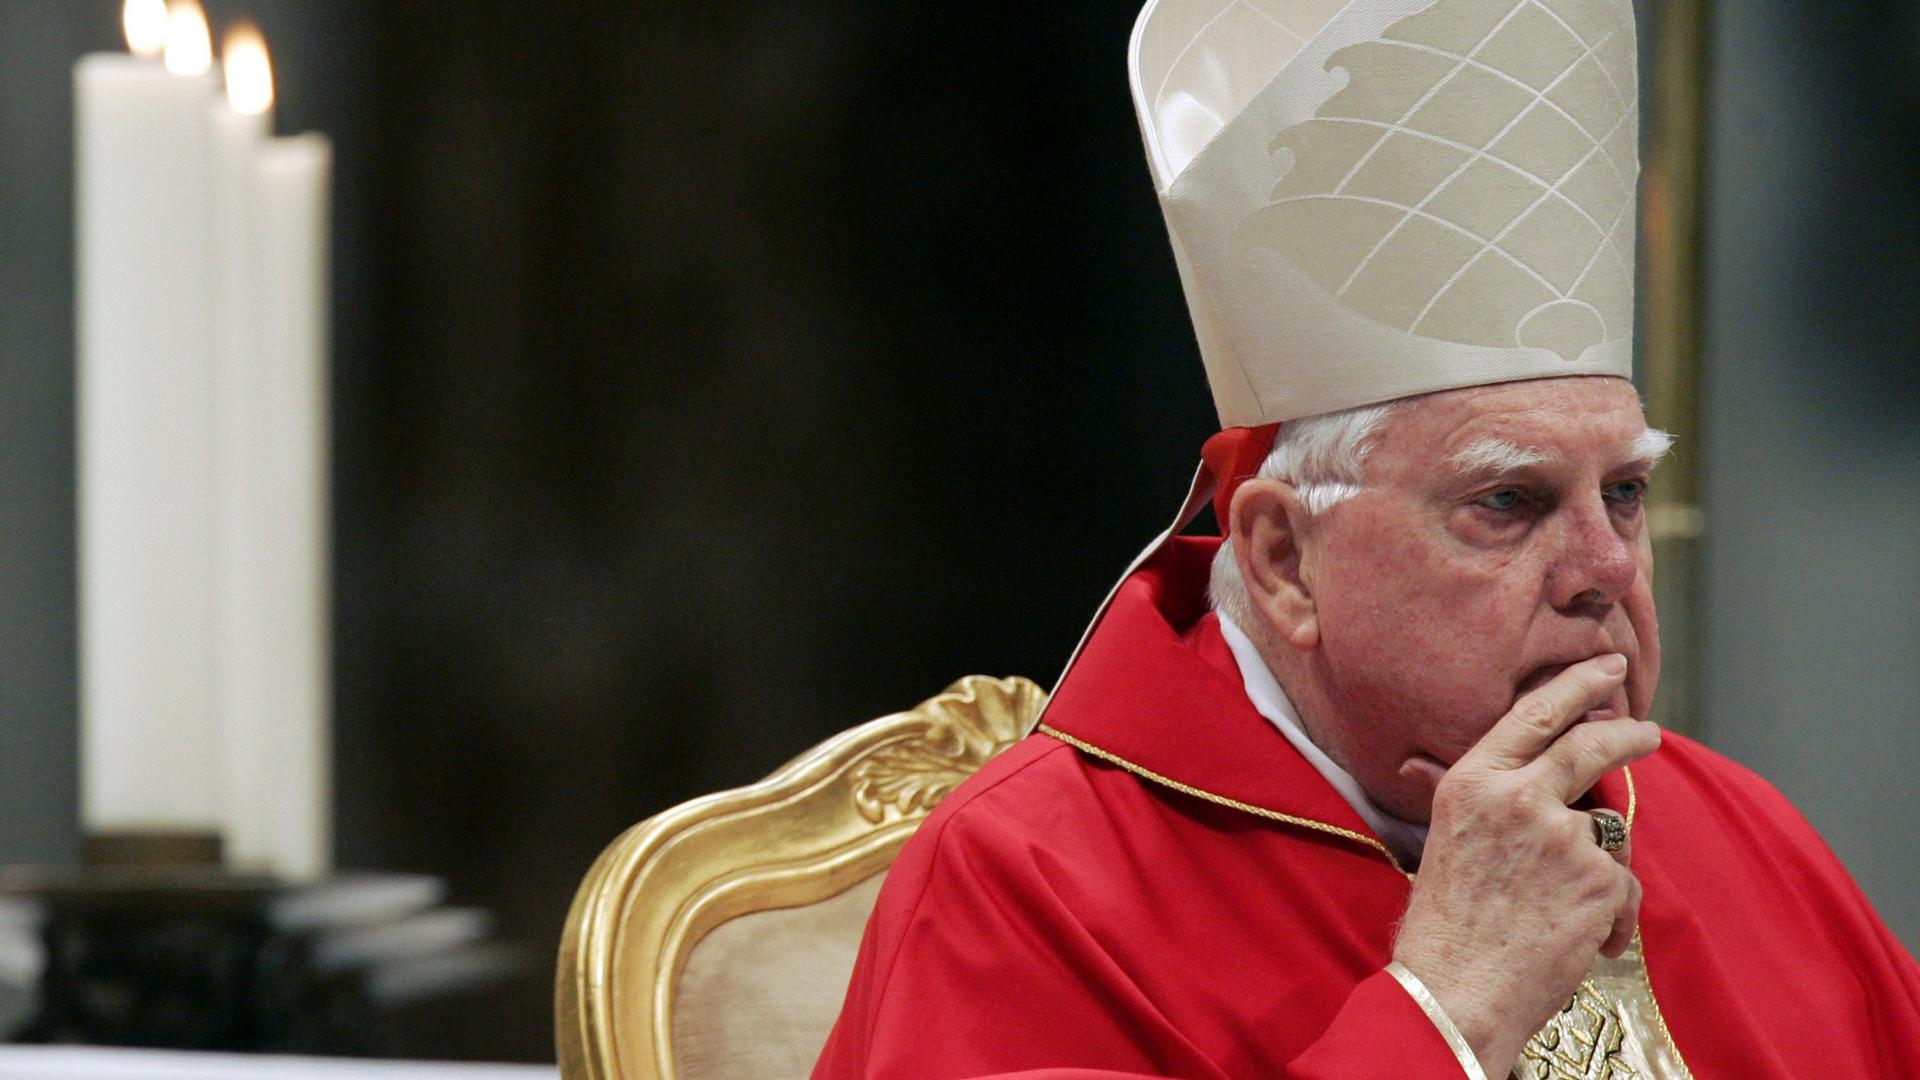 Cardinal Bernard Law, with a hand to his mouth, looks off.